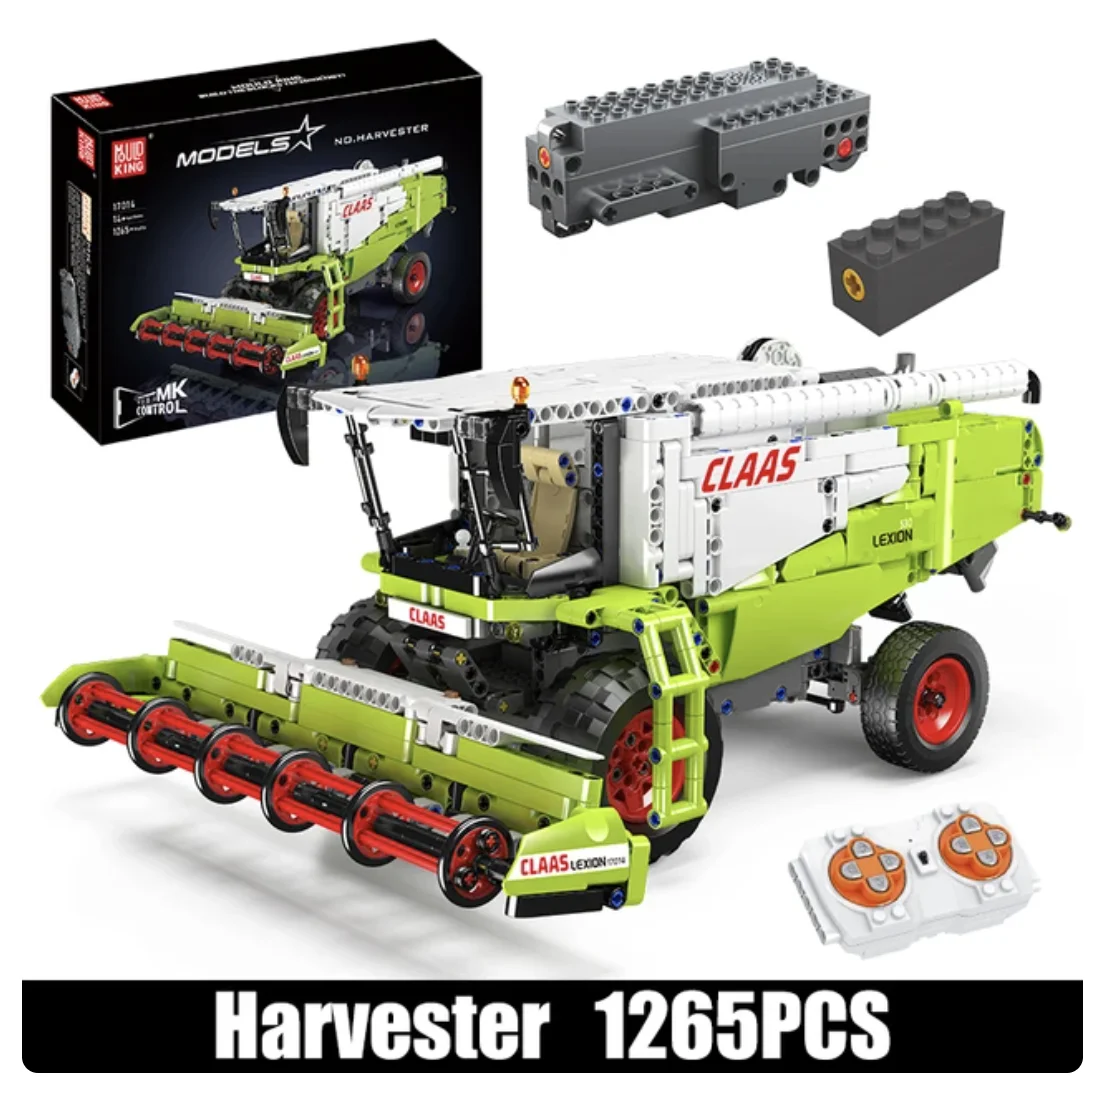 

MOULD KING 17014 Technical Series Combine Harvester Model Remote Control Building Blocks Farm Vehicle Toys for Boys